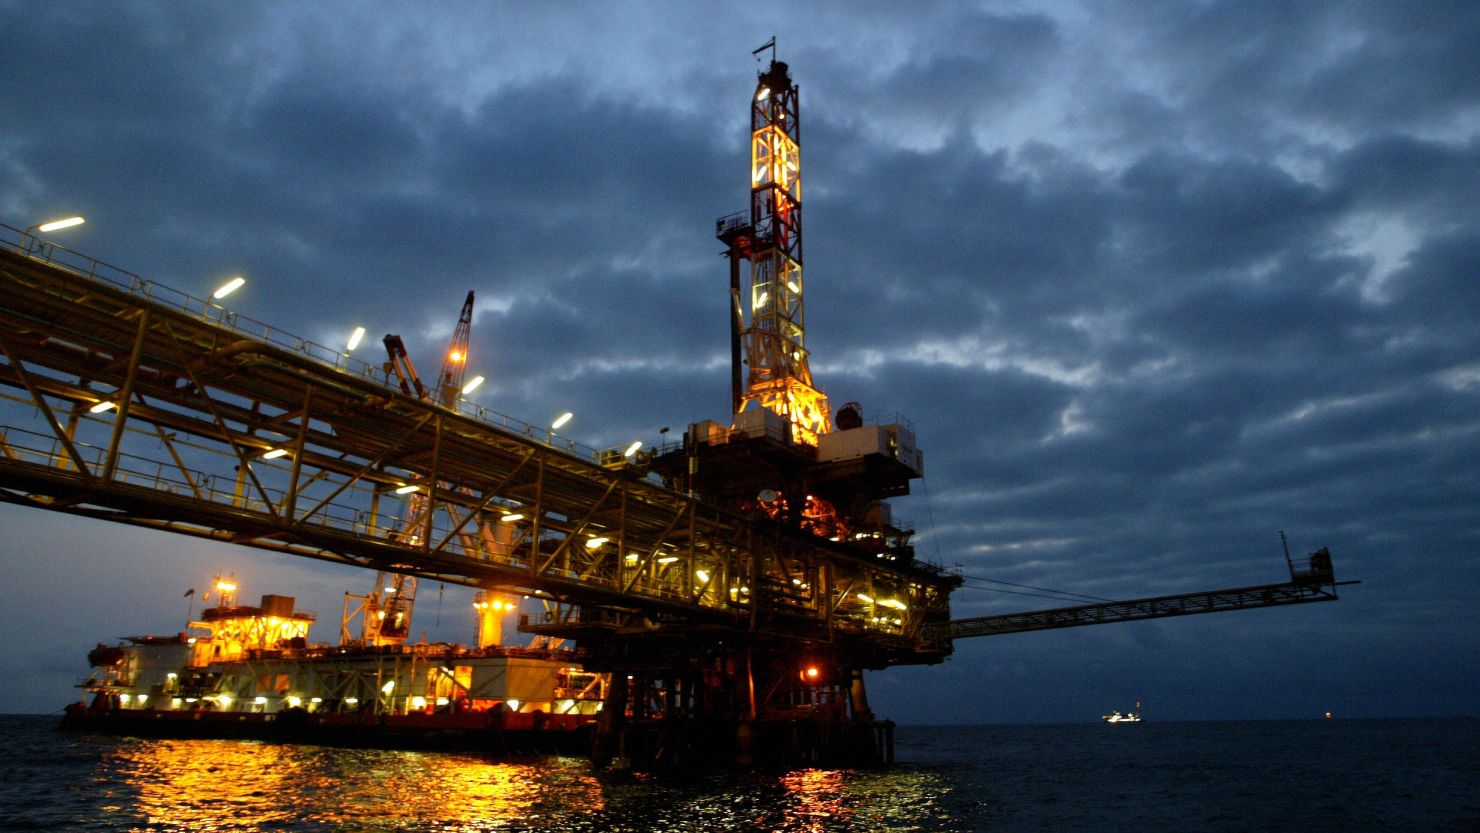 An oil offshore platform off the coast of Angola, Africa's second largest oil producer.